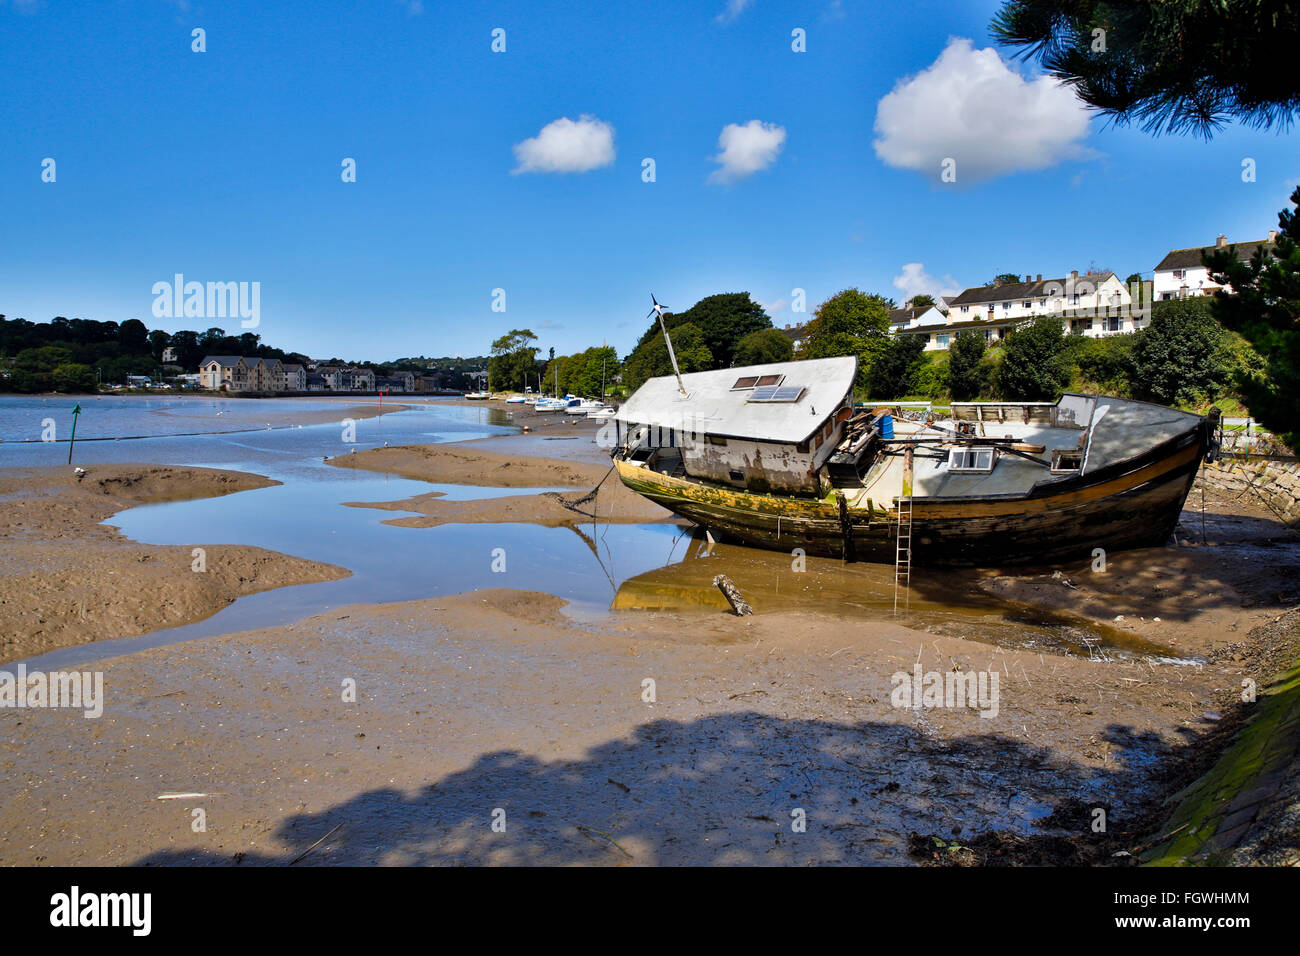 Truro; Boat at Boscawen Park on River Fal; Cornwall; UK Stock Photo